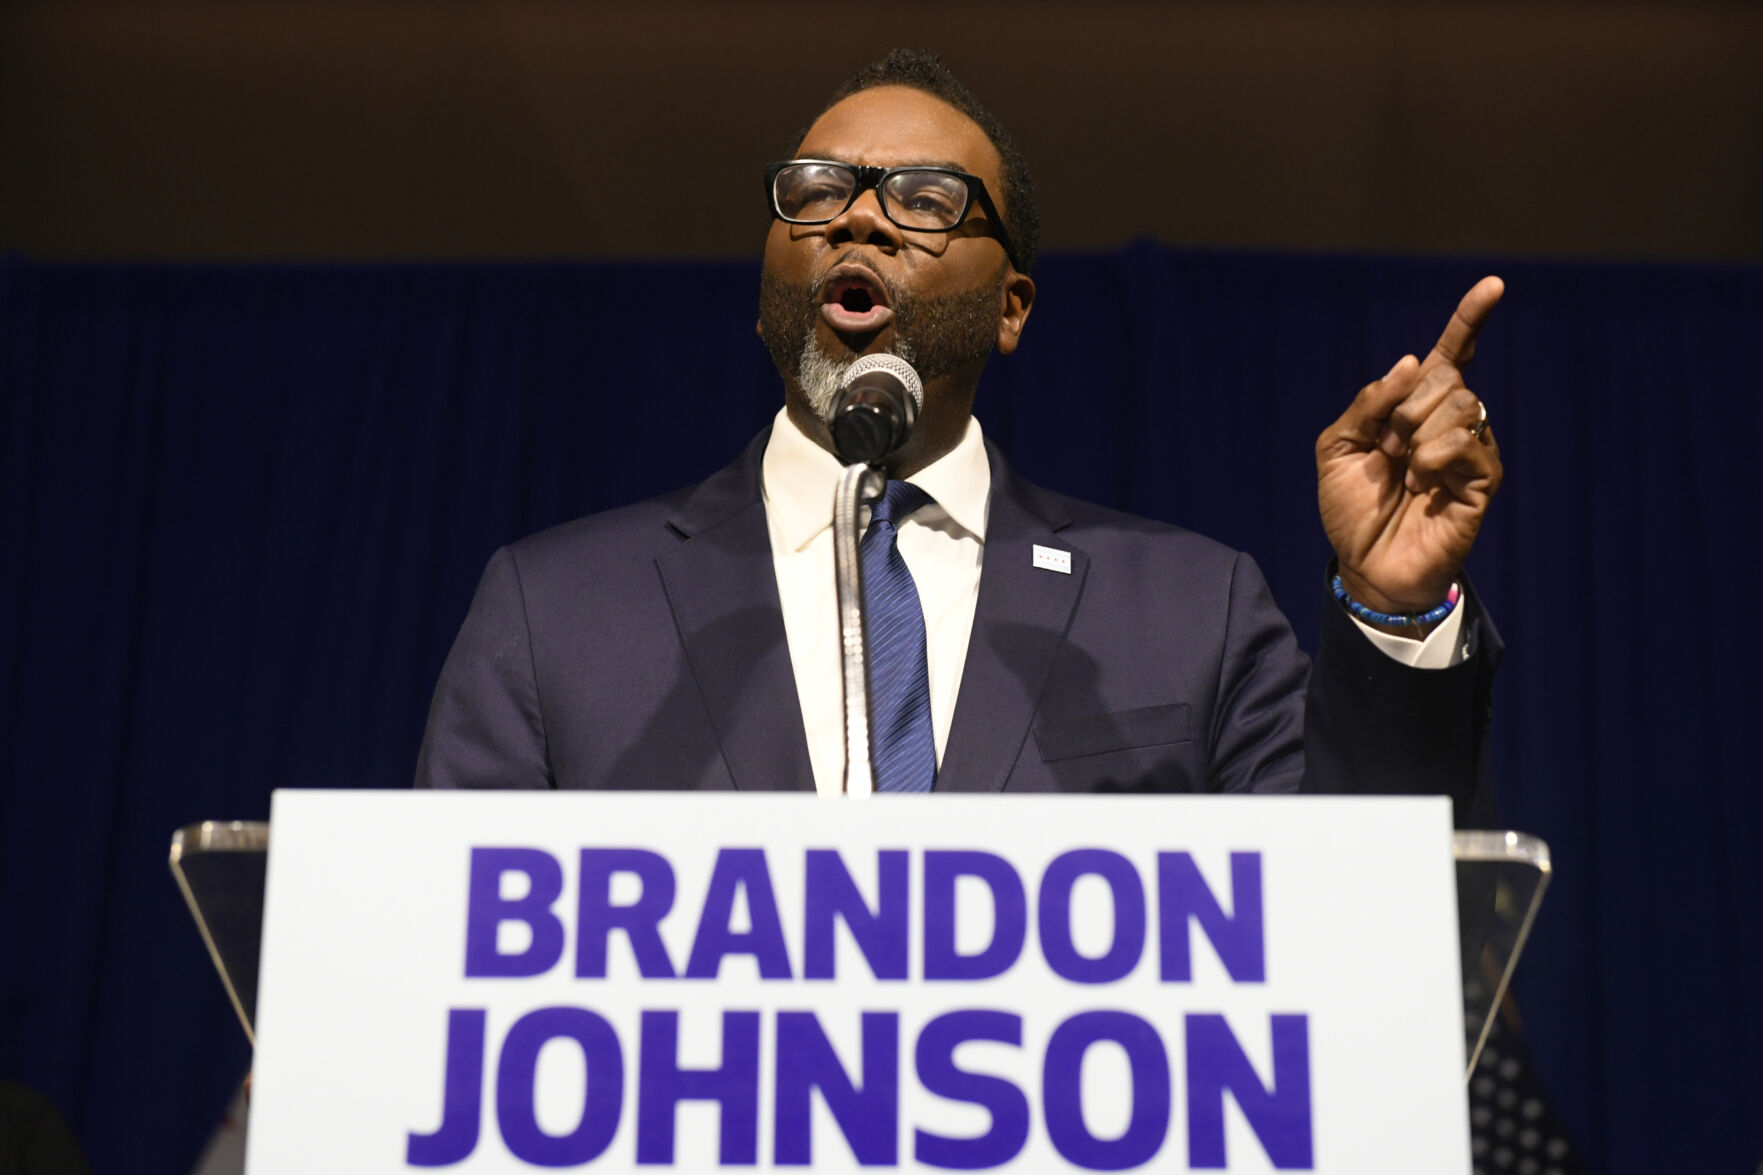 <p>FILE - Chicago Mayor-elect Brandon Johnson speaks to supporters, April 4, 2023, in Chicago. Johnson will take office Monday, May 15, 2023. He faces an influx of migrants in desperate need of shelter, pressure to build support among skeptical business leaders and summer months that historically bring a spike in violent crime. (AP Photo/Paul Beaty, file)</p>   PHOTO CREDIT: Paul Beaty